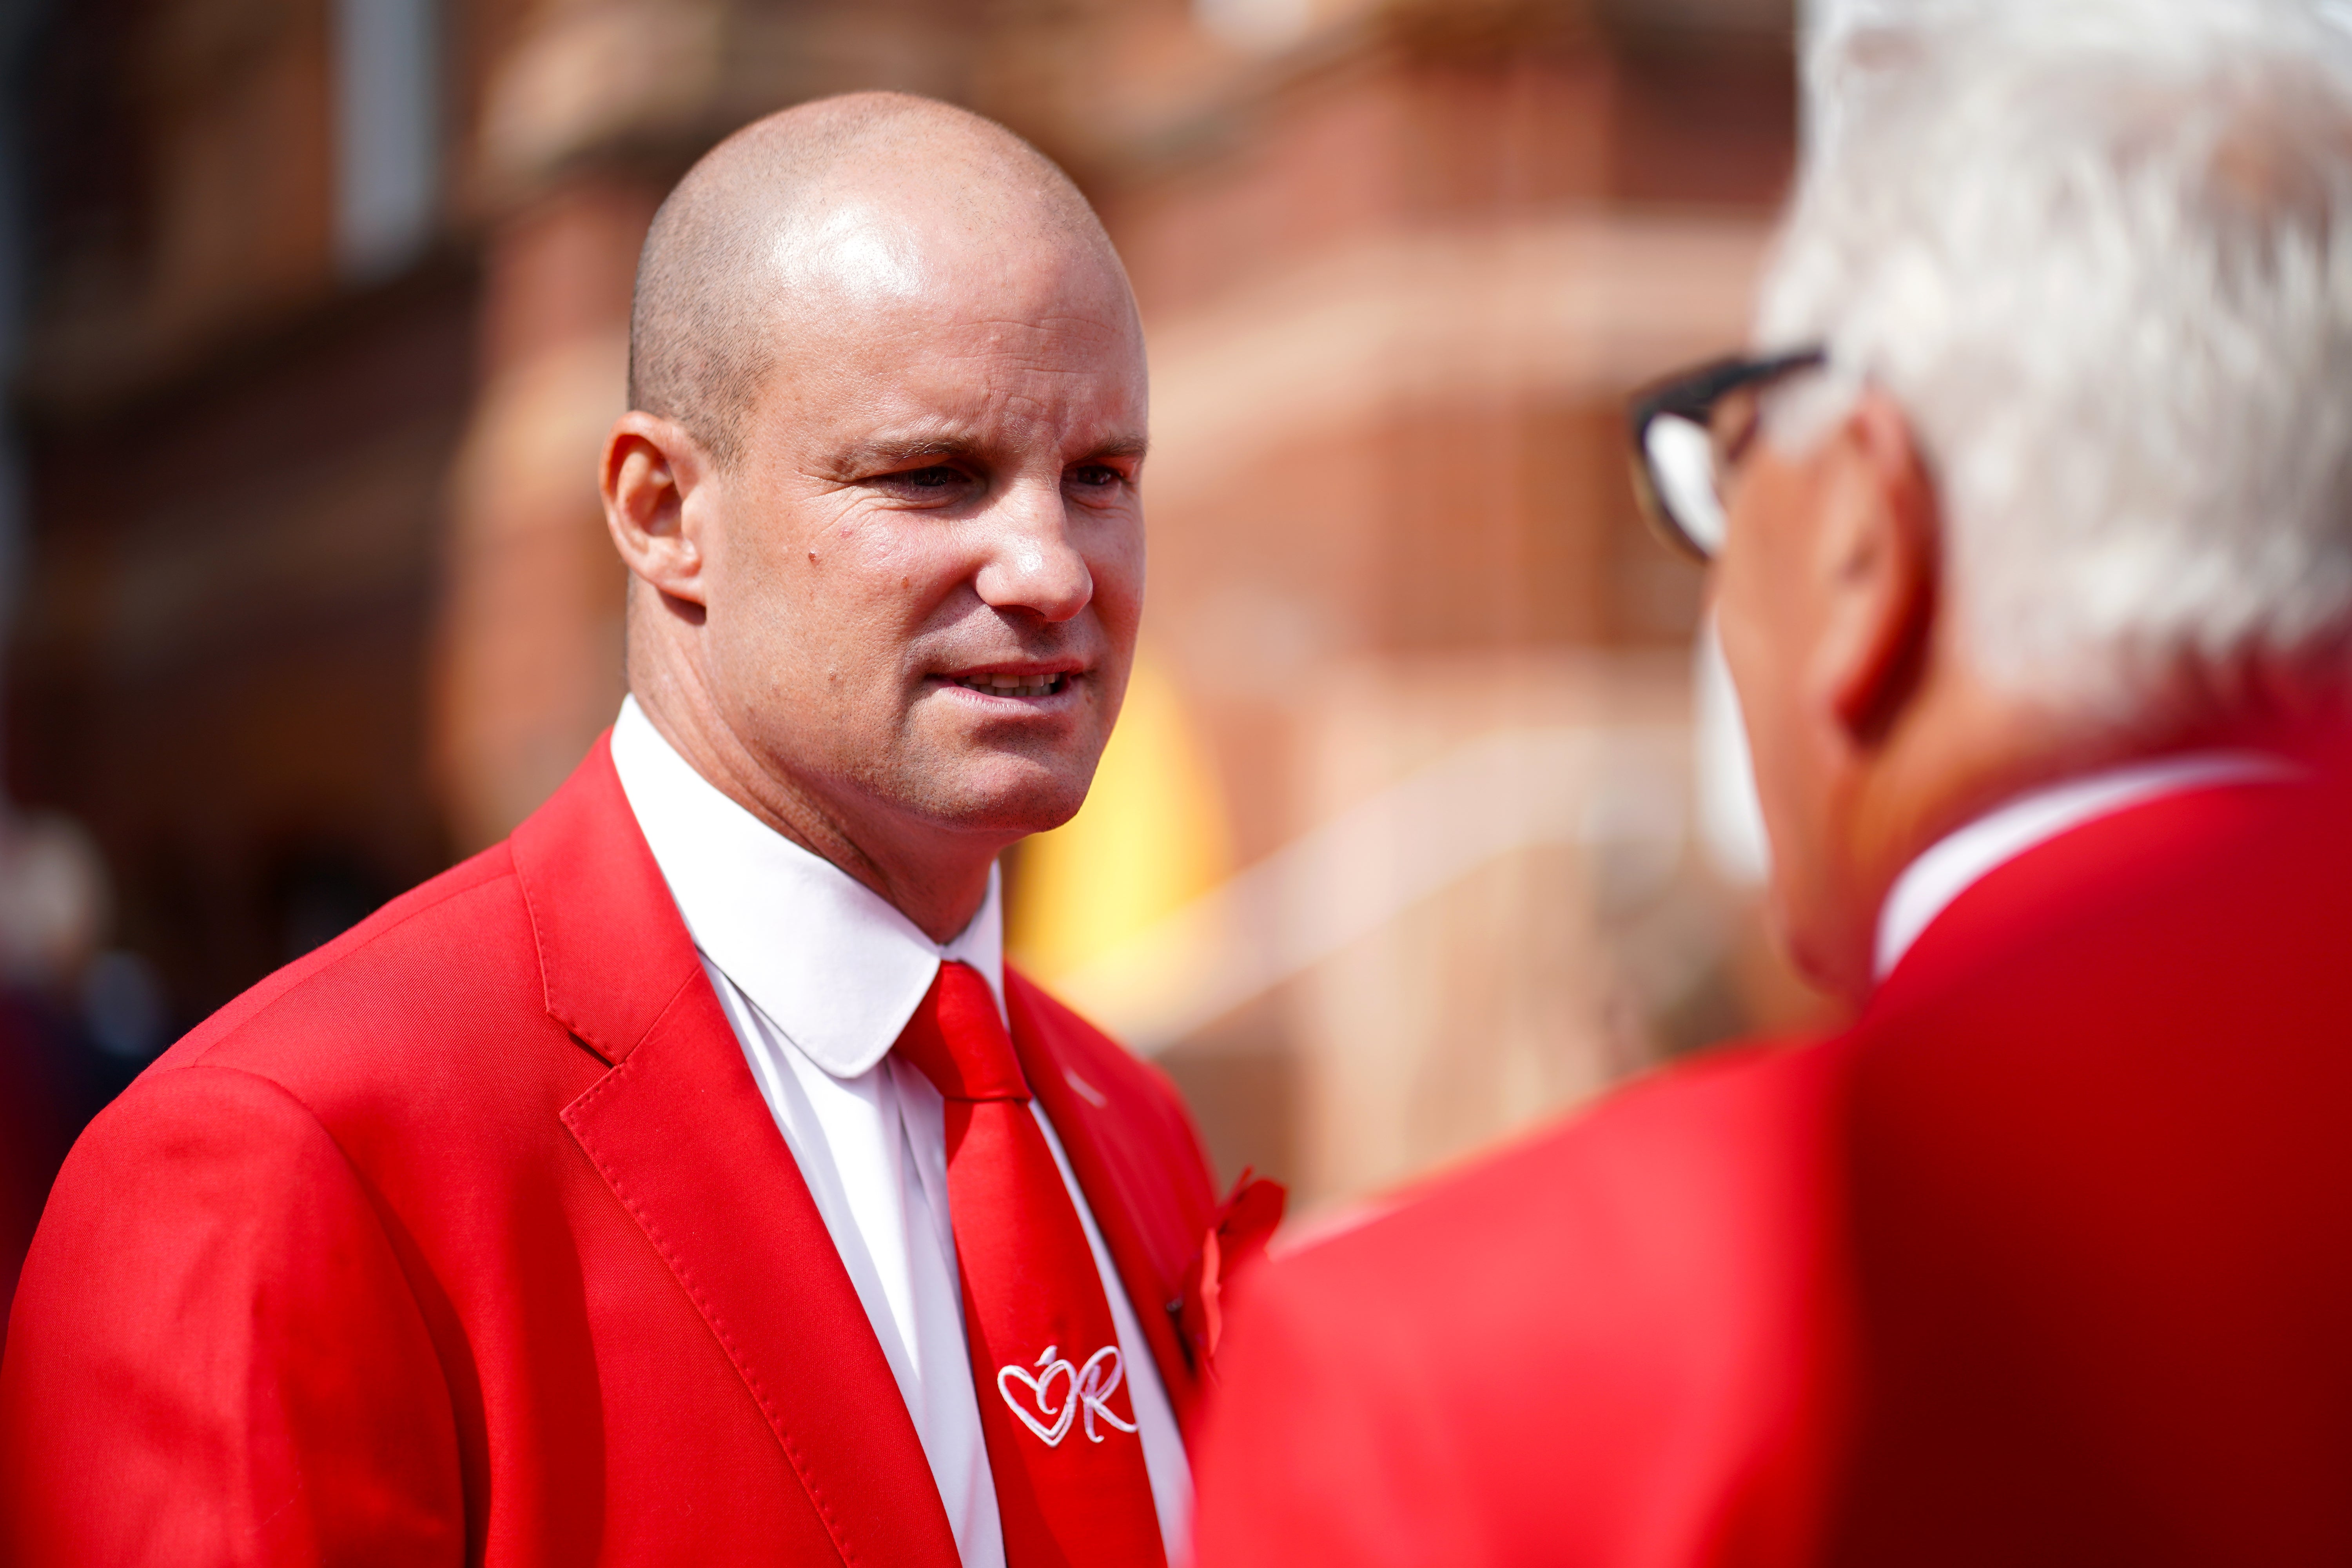 Sir Andrew Strauss will take over as England men’s director of cricket on a temporary basis